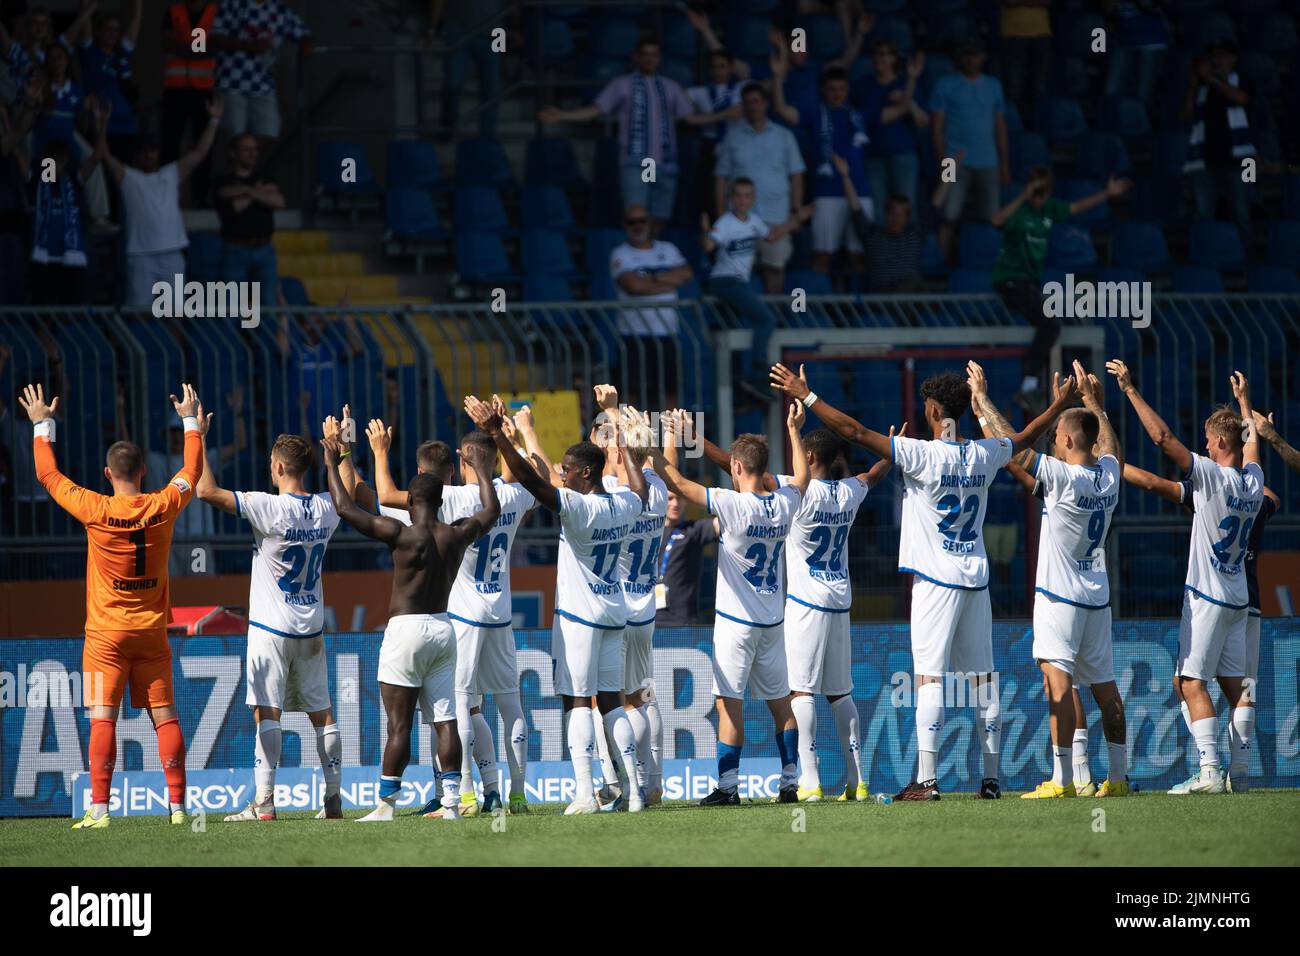 07 August 2022, Lower Saxony, Brunswick: Soccer: 2nd Bundesliga, Eintracht Braunschweig - Darmstadt 98, Matchday 3, Eintracht Stadium. Darmstadt's players cheer with arms raised with the fans after the game. Photo: Swen Pförtner/dpa - IMPORTANT NOTE: In accordance with the requirements of the DFL Deutsche Fußball Liga and the DFB Deutscher Fußball-Bund, it is prohibited to use or have used photographs taken in the stadium and/or of the match in the form of sequence pictures and/or video-like photo series. Stock Photo